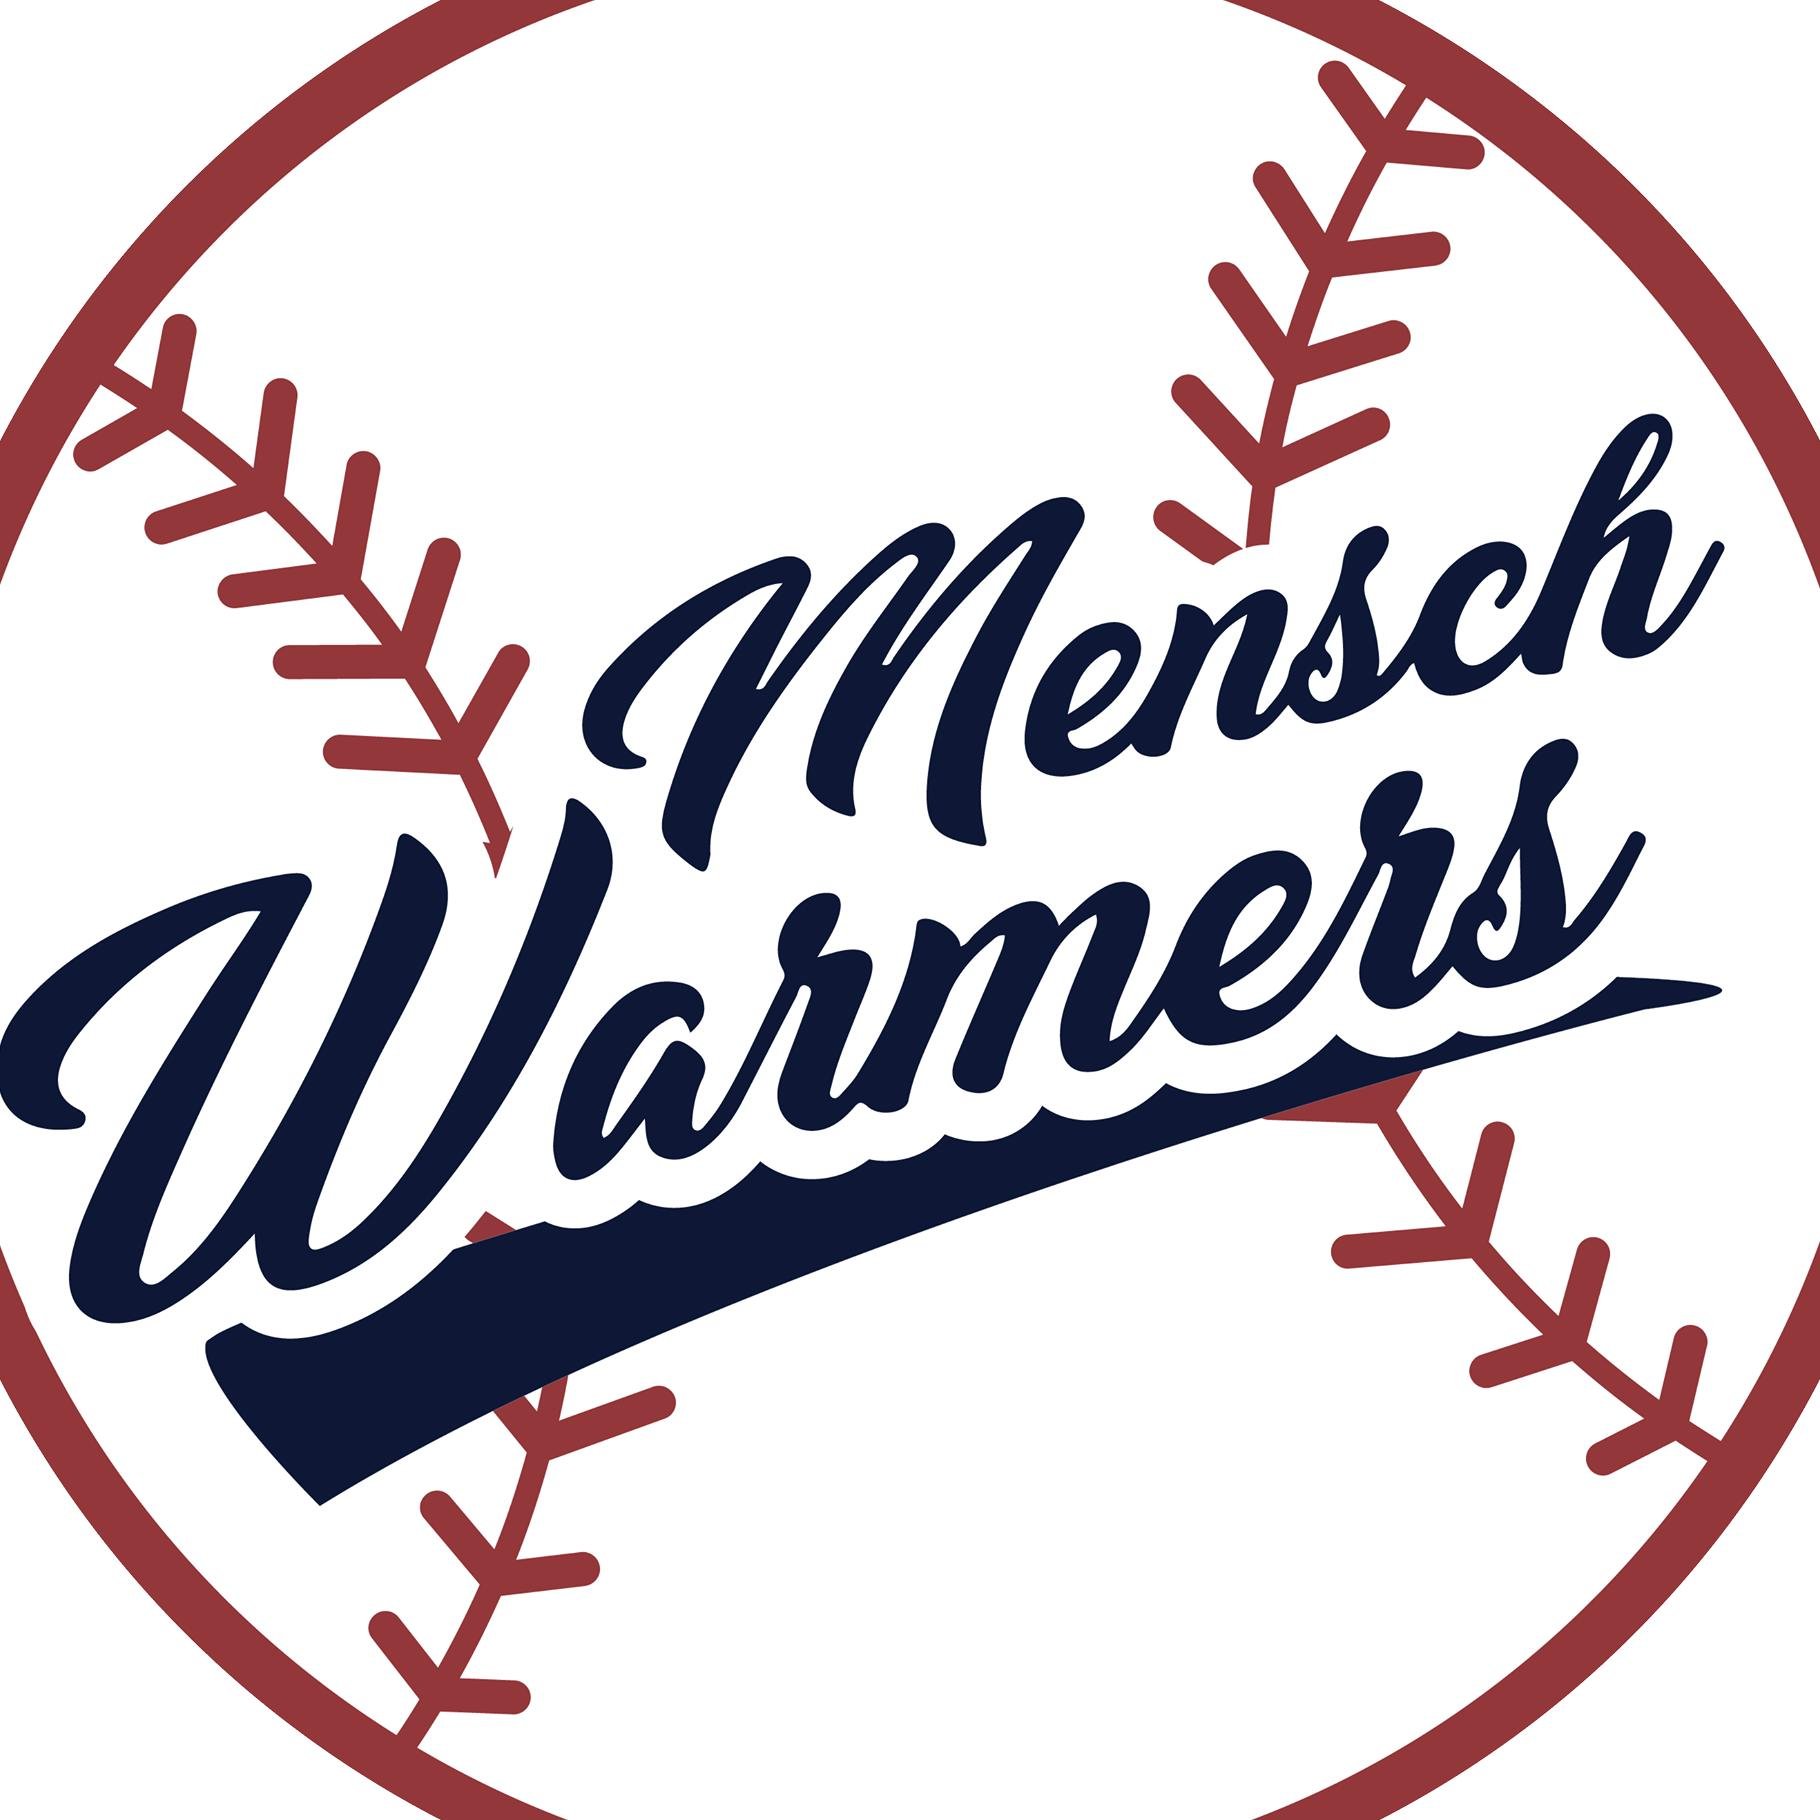 Menschwarmers Podcast